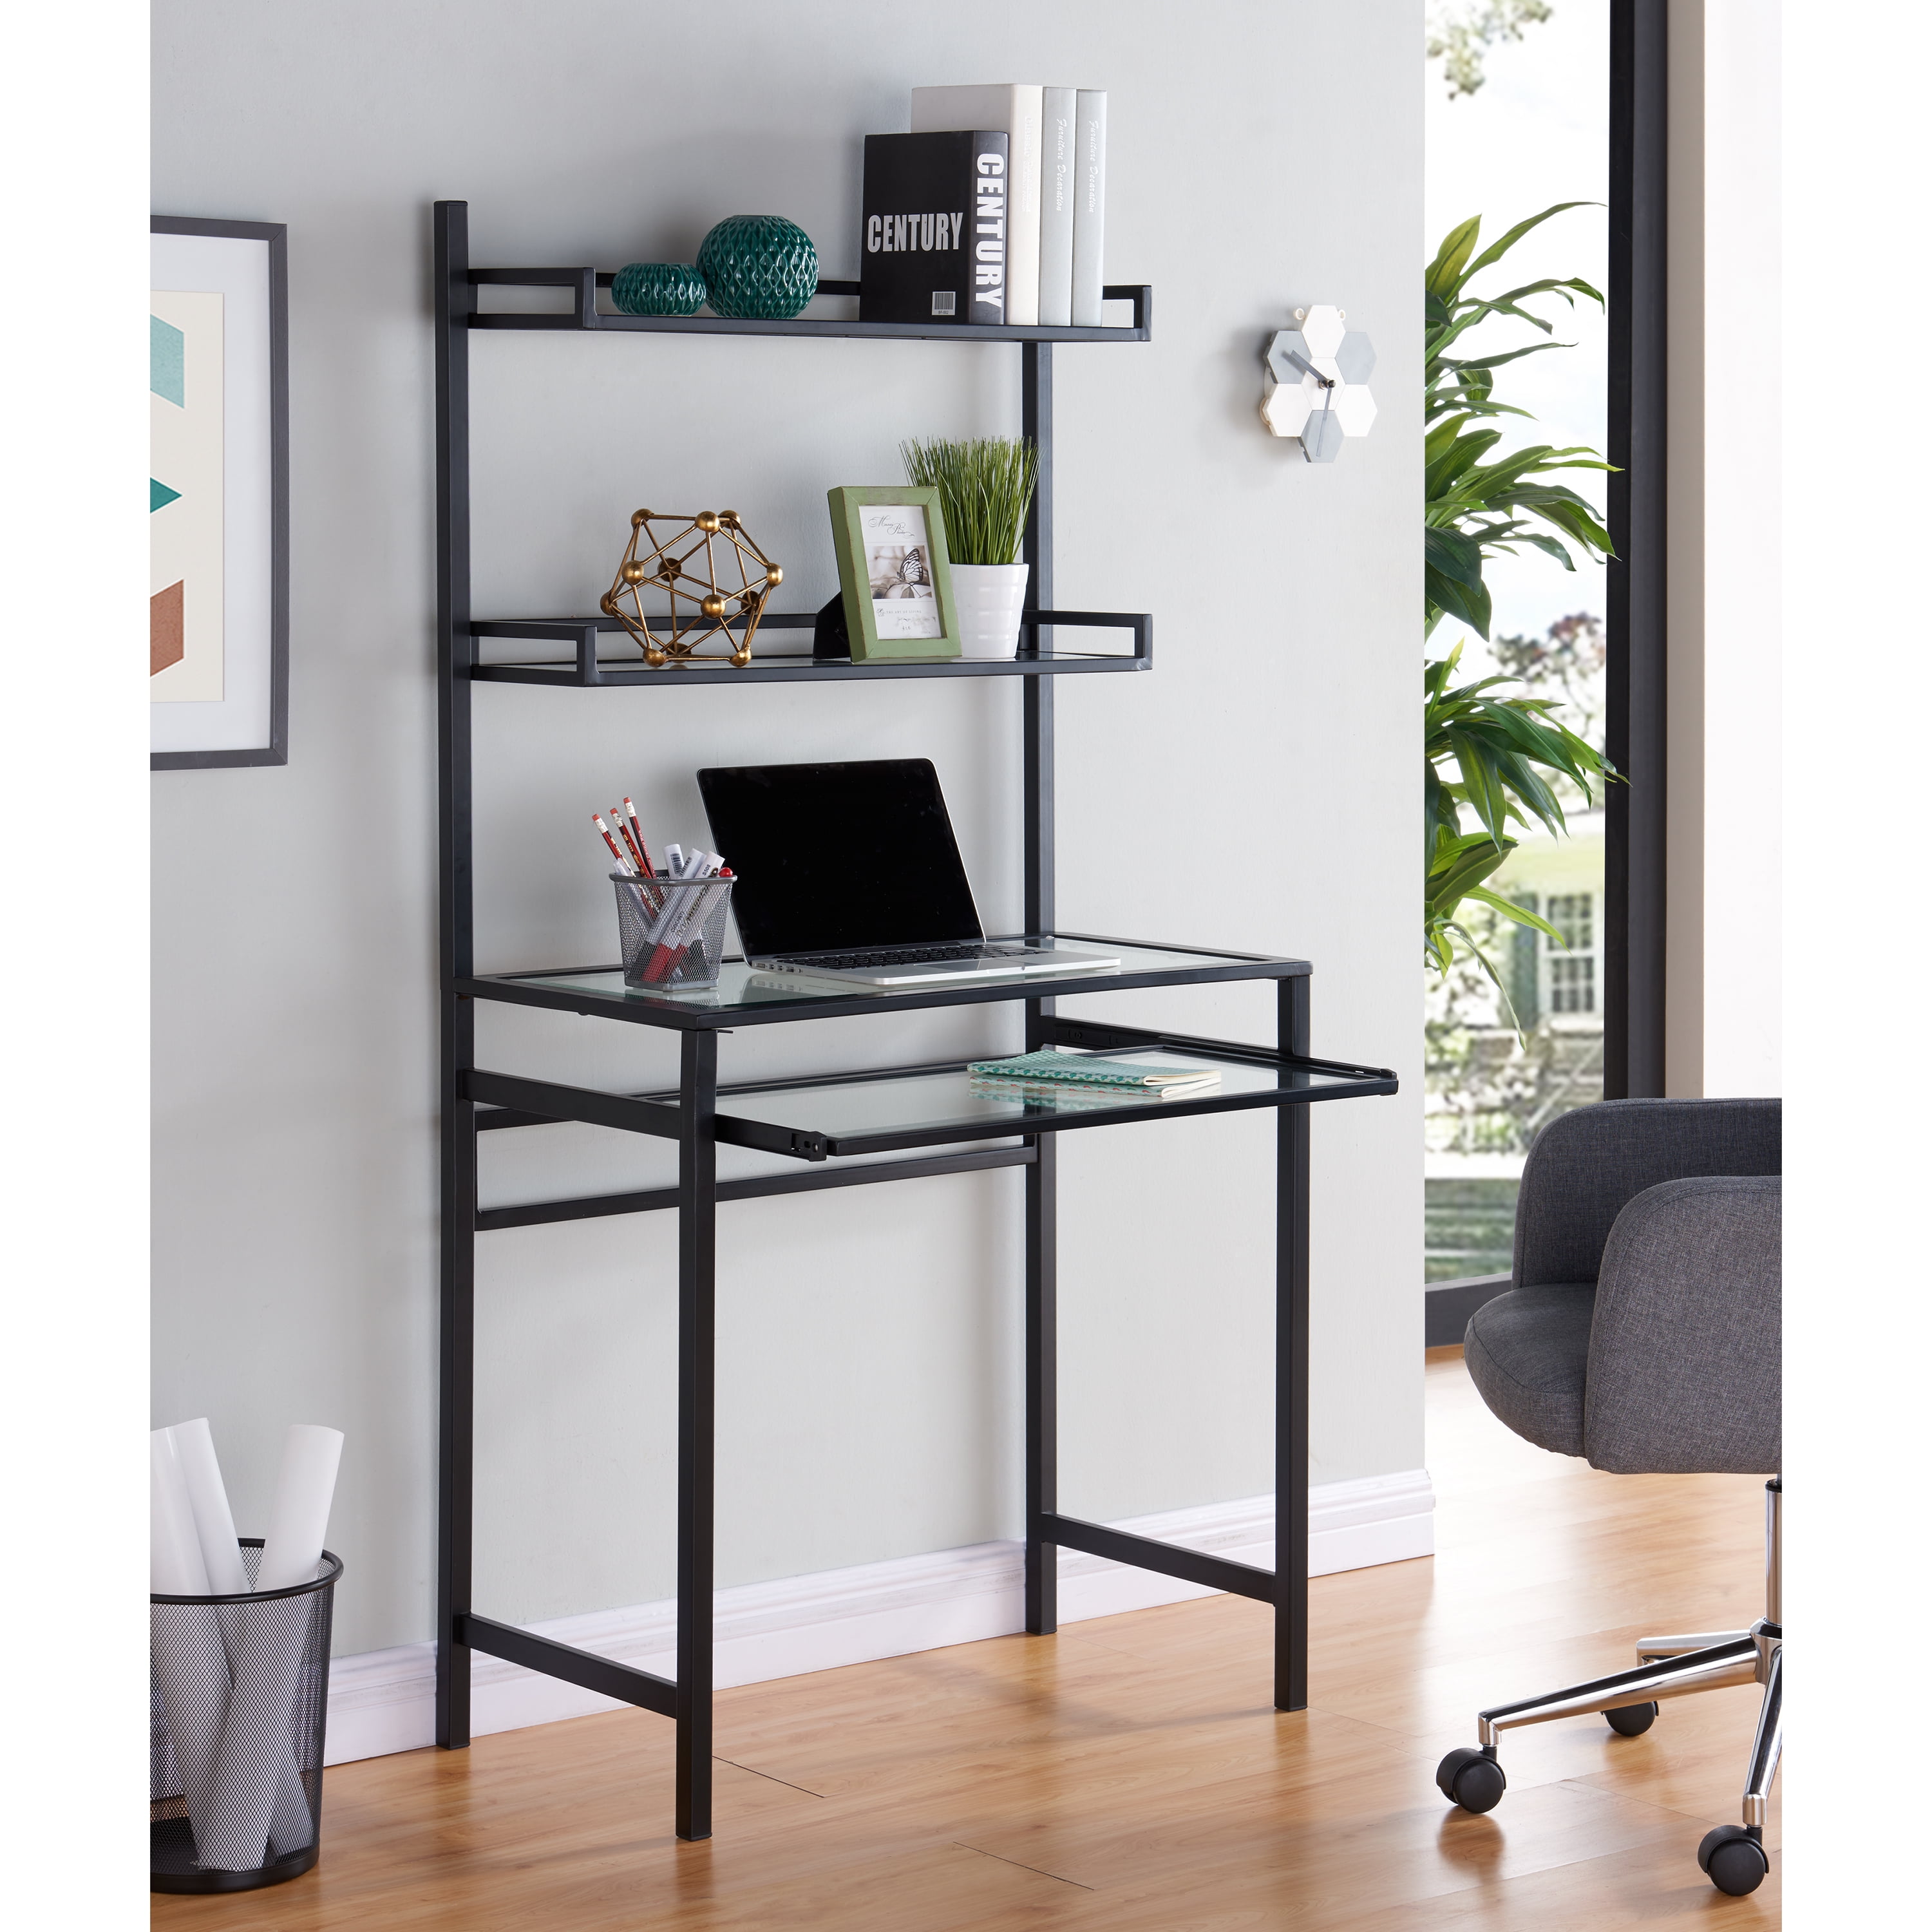 Southern Enterprises Braxlin Metal Glass Small Space Desk With